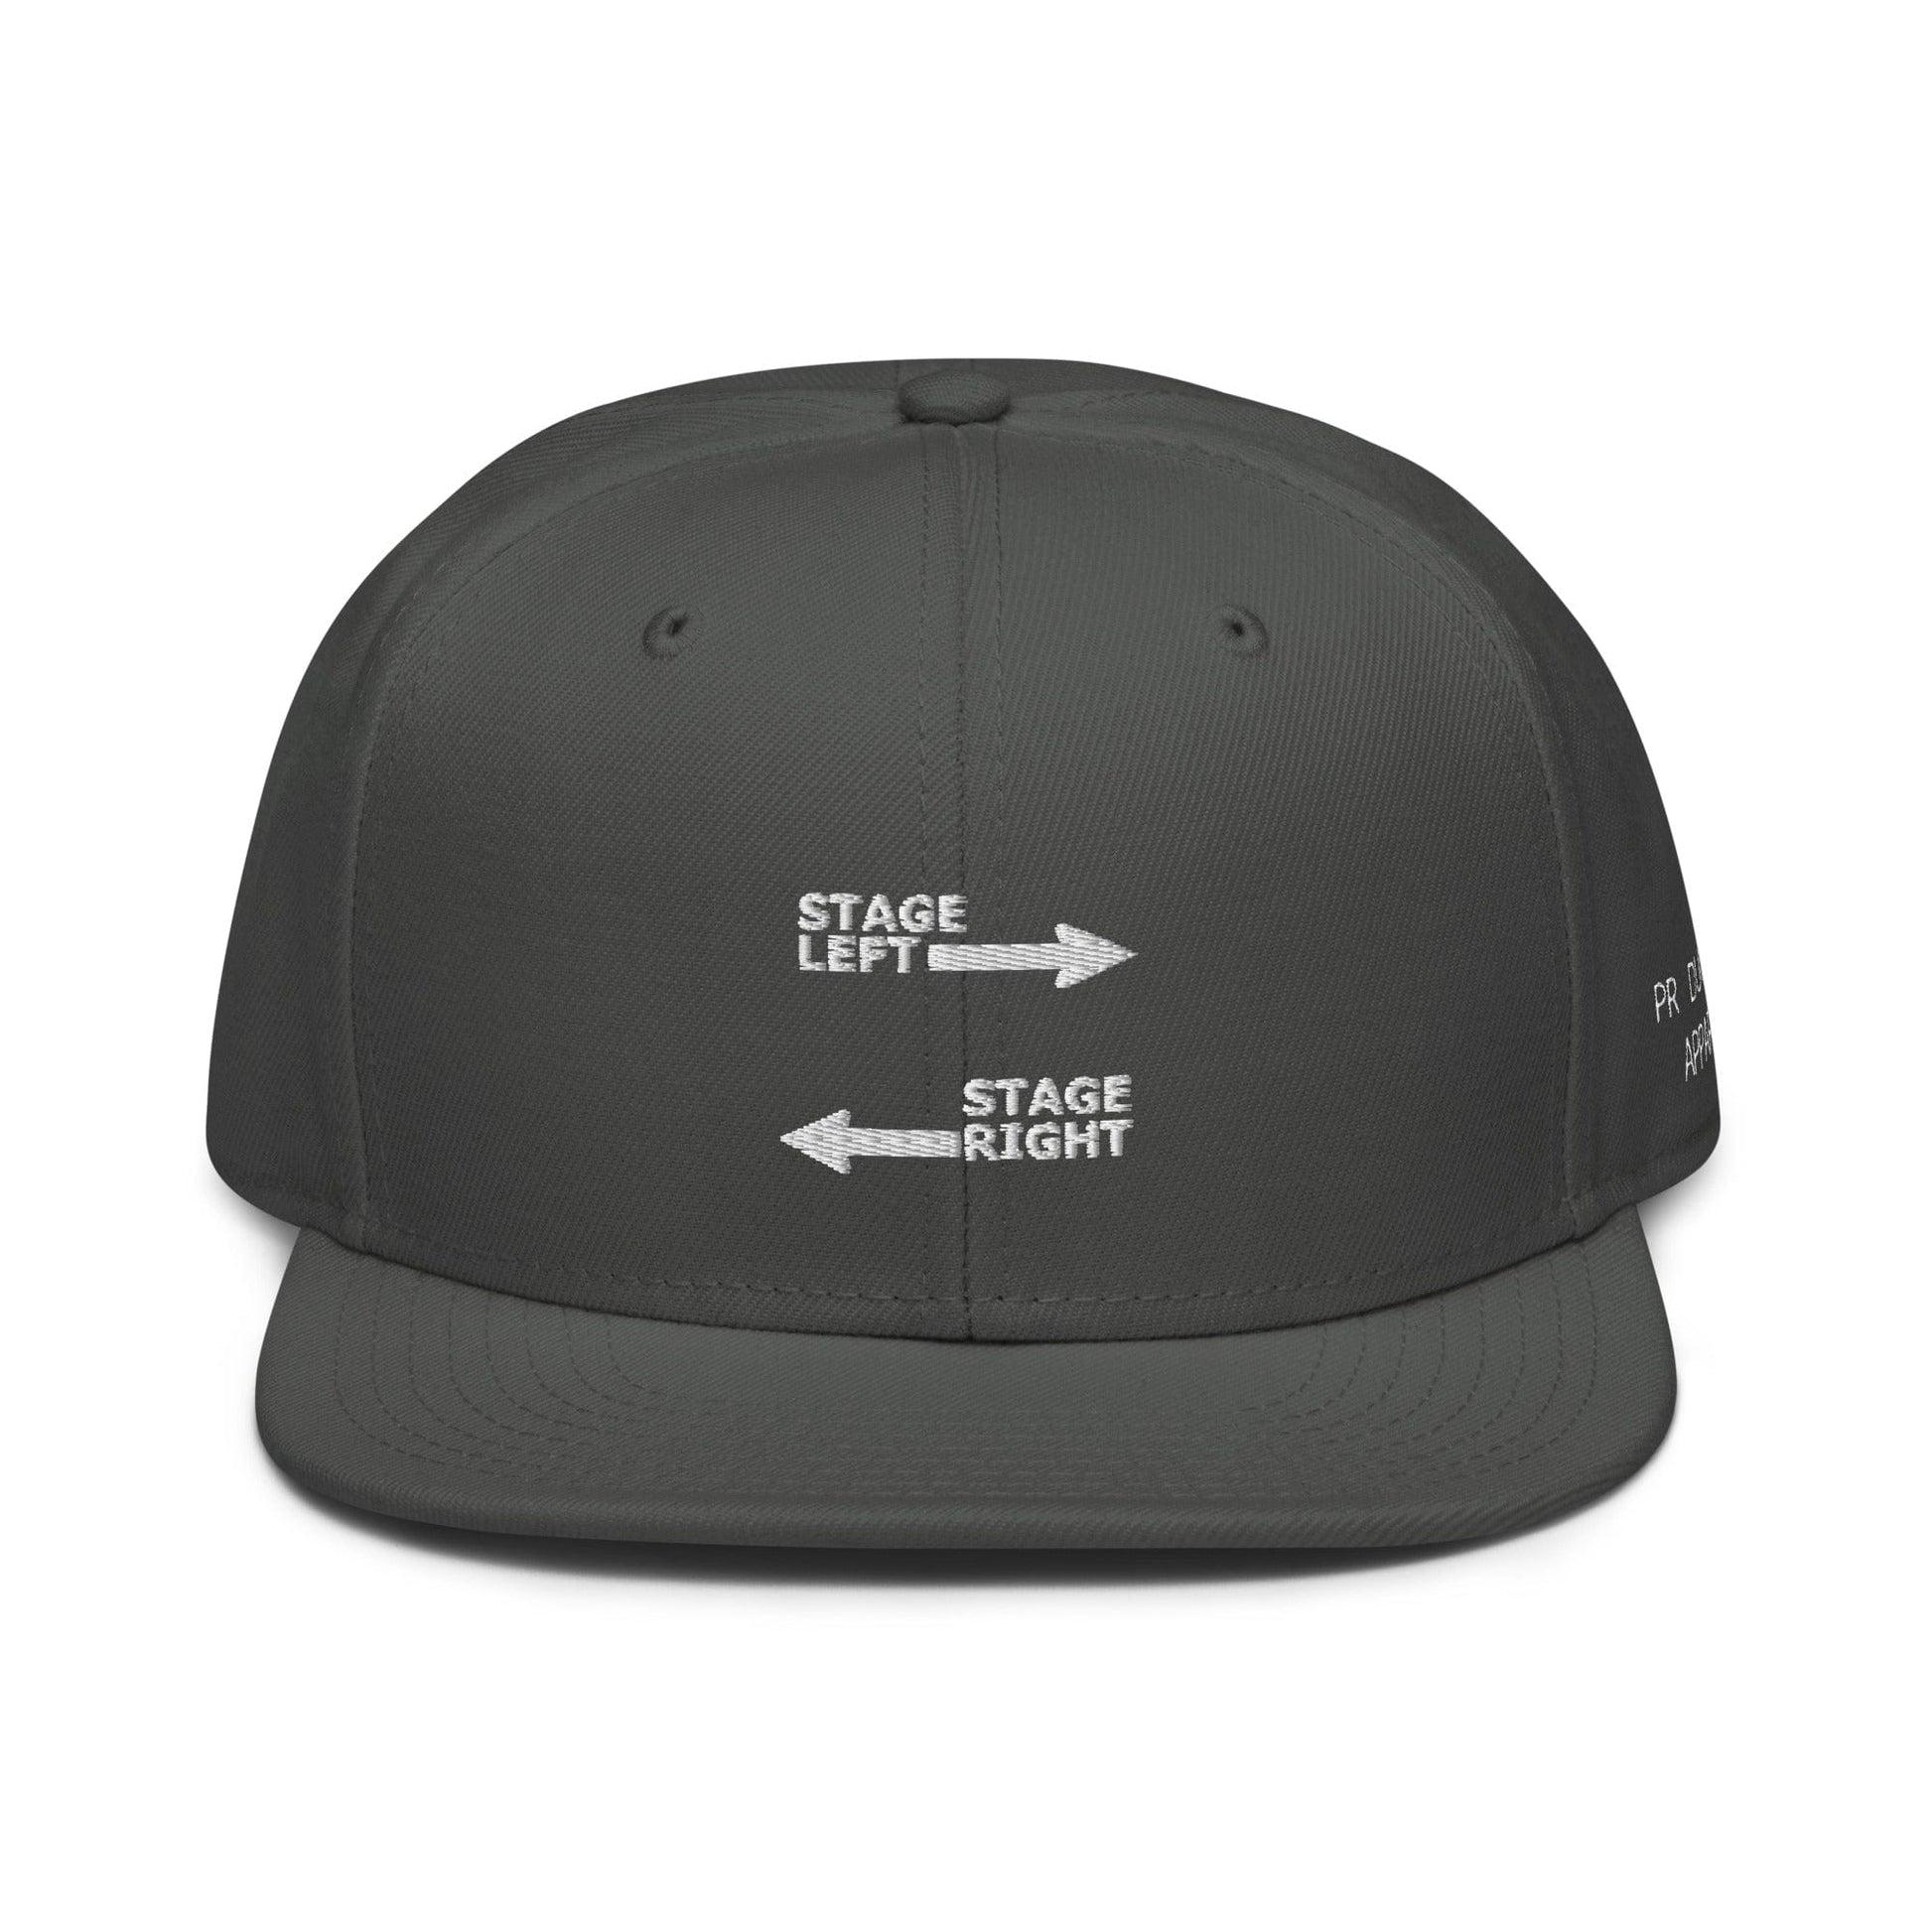 Production Apparel Stage Left - Stage Right Hat Charcoal gray